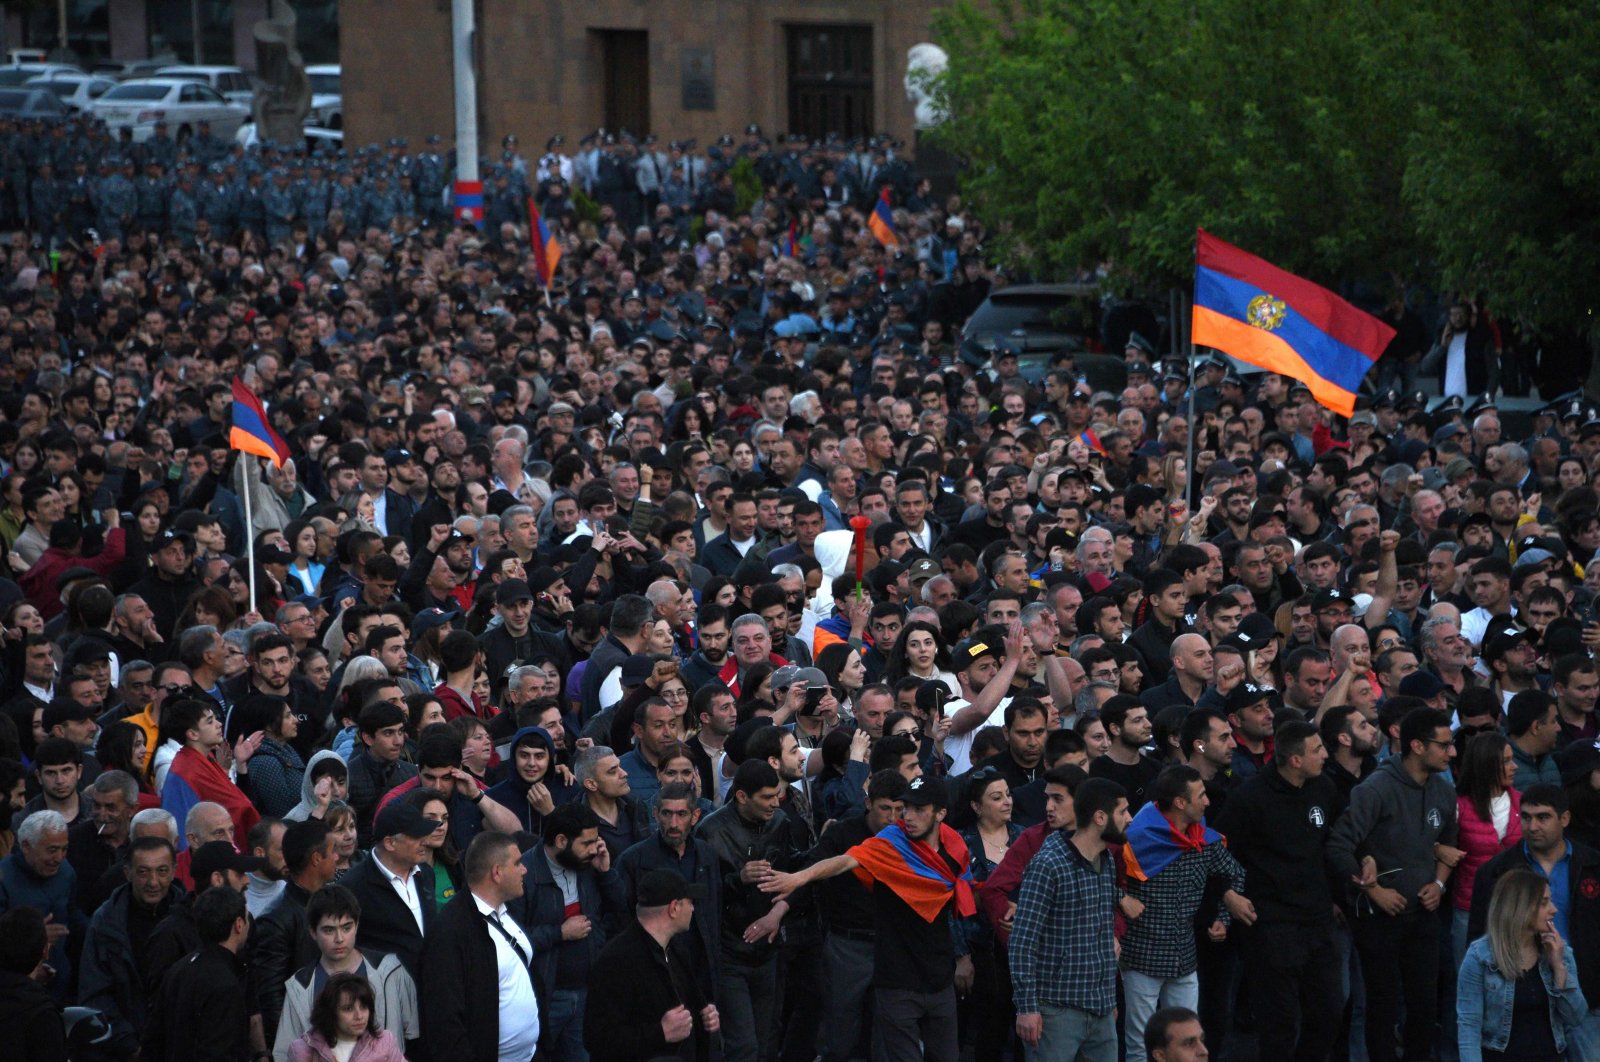 Protesters wave national flags during a rally called by opposition parties in a bid to oust the Prime Minister over his handling of a territorial dispute with arch-enemy Azerbaijan, in Yerevan, May 5, 2022. (AFP Photo)